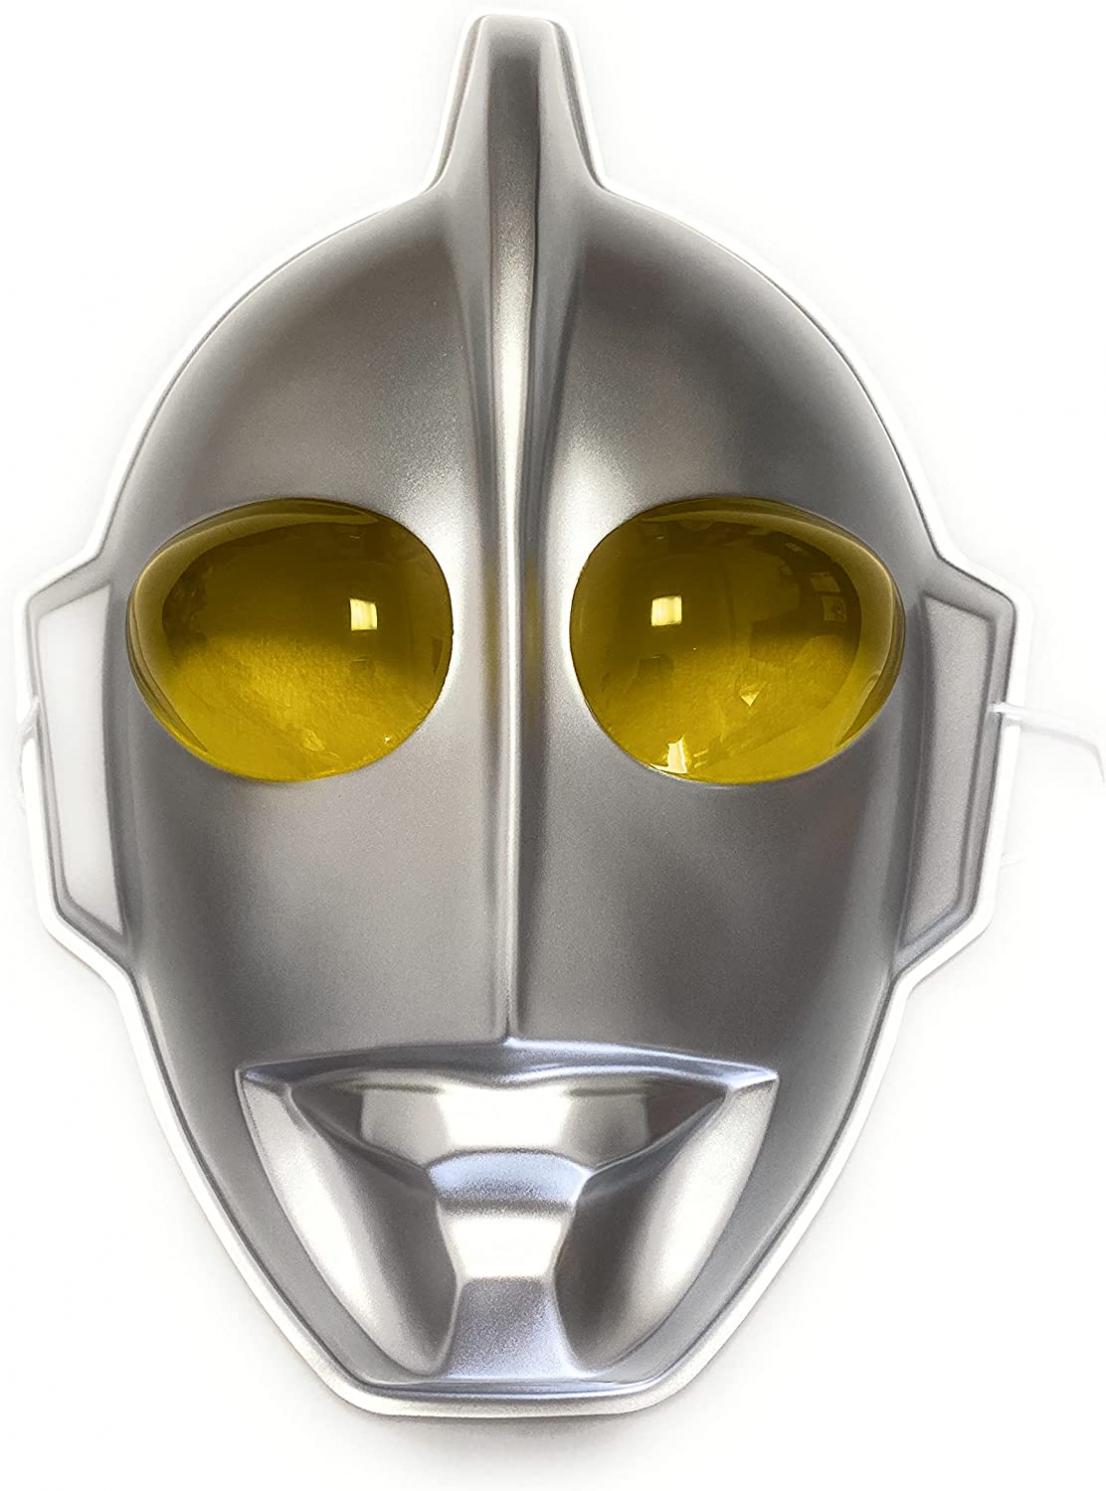 happy happy Ultraman Mask for Christmas Costume,Character Cosplay Half Face Masks Masquerade Party Ultraman, Silver, Free Size